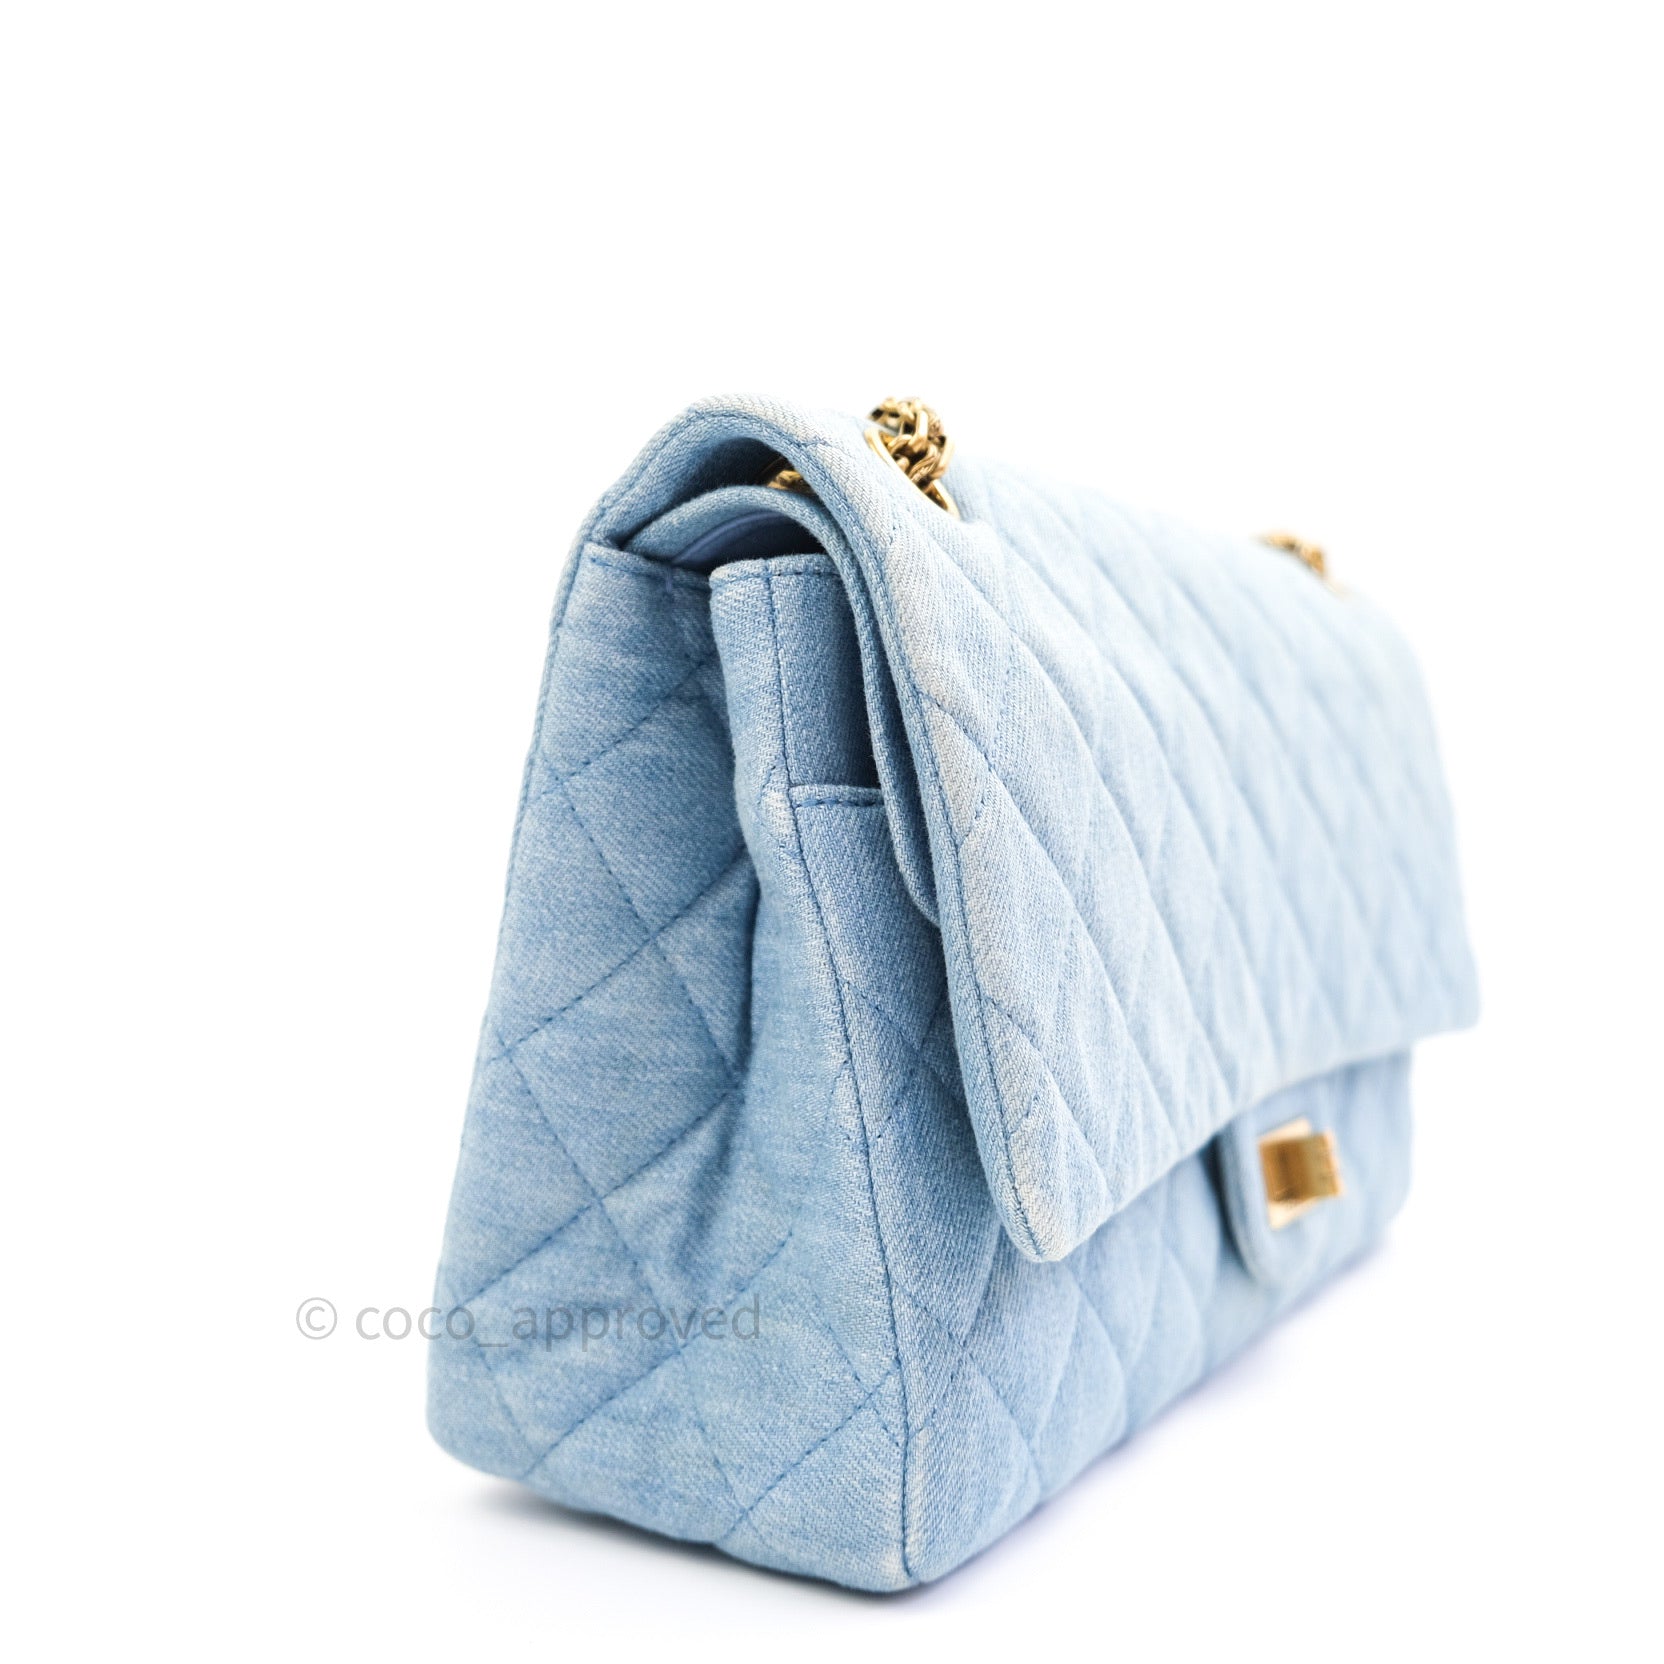 CHANEL Denim Quilted Chanel 22 Blue 1296116